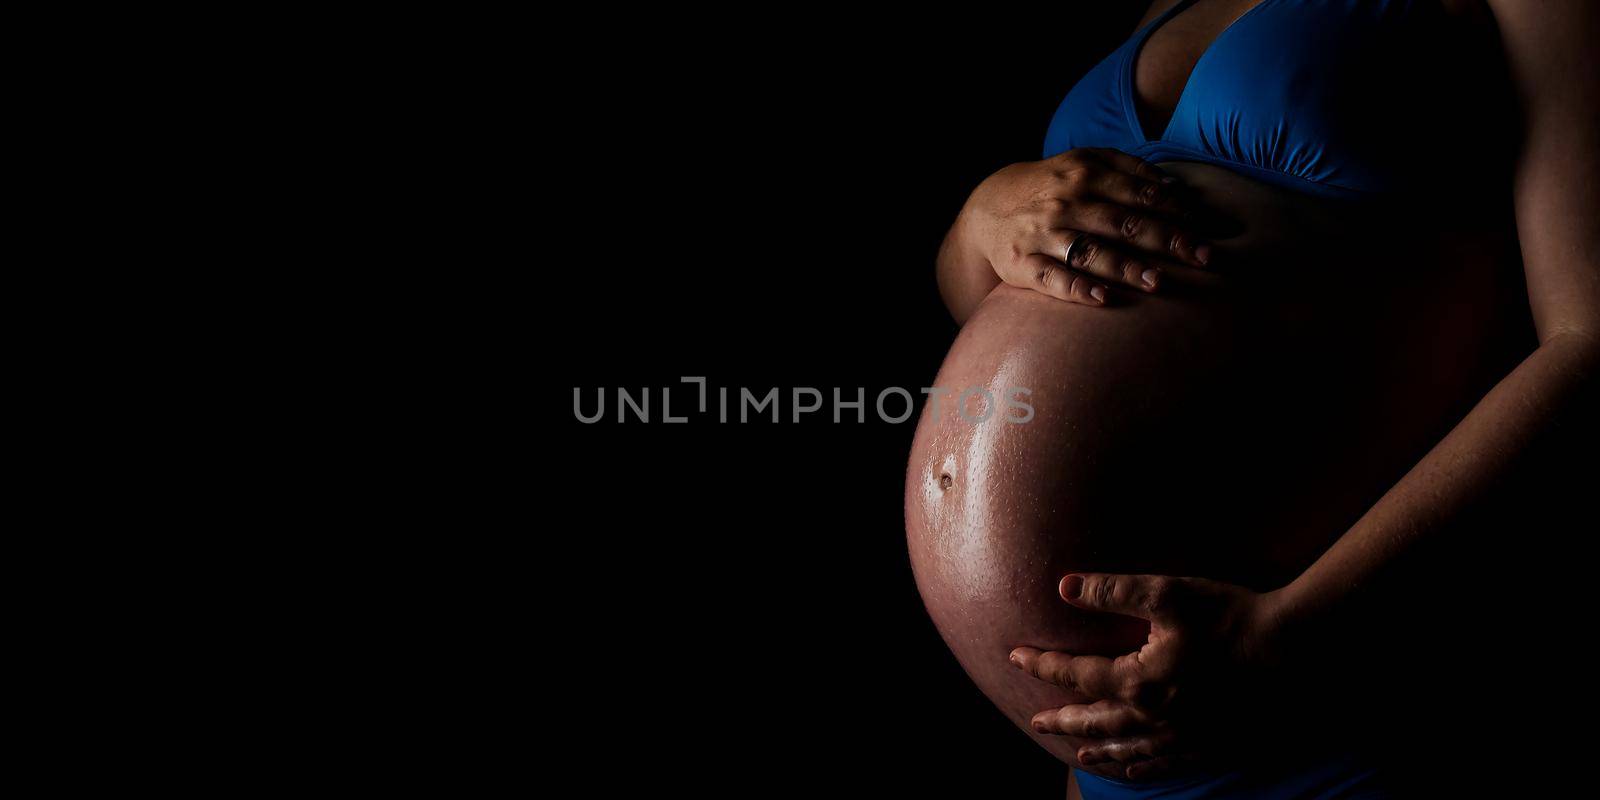 Belly of a pregnant woman on the black background. Belly of a pregnant woman in low key. Body of a 9-month pregnant woman. 40 weeks pregnant women infront of black backdrop